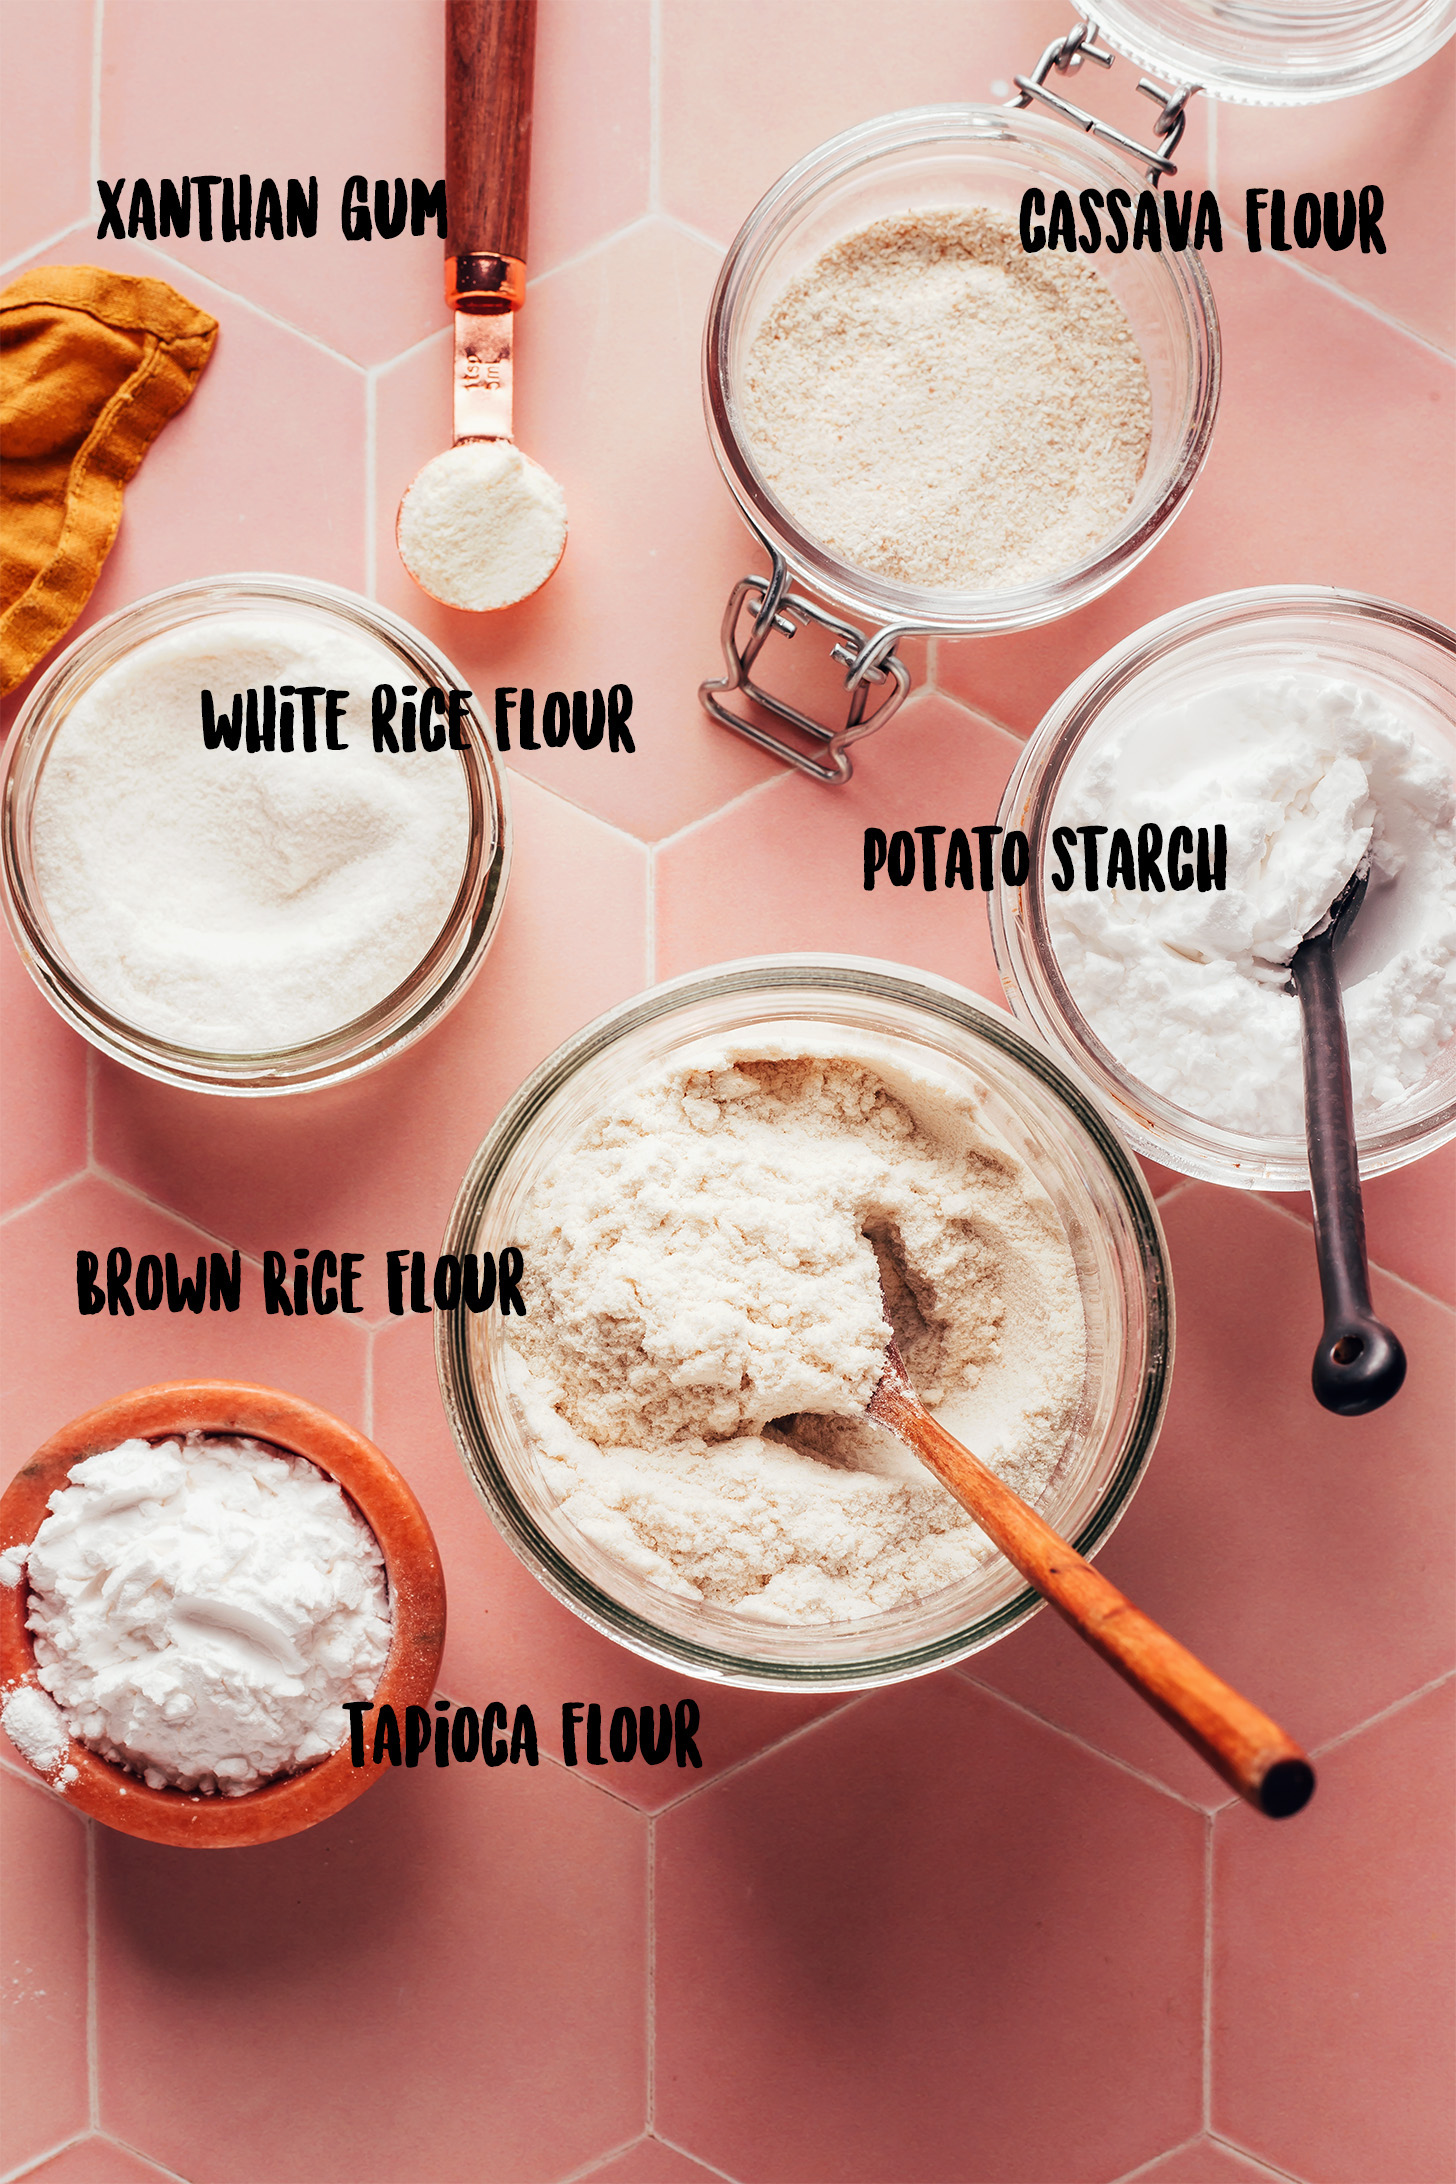 Jars, bowls, and spoonfuls of xanthan gum, white rice flour, brown rice flour, tapioca starch, potato starch, and cassava flour